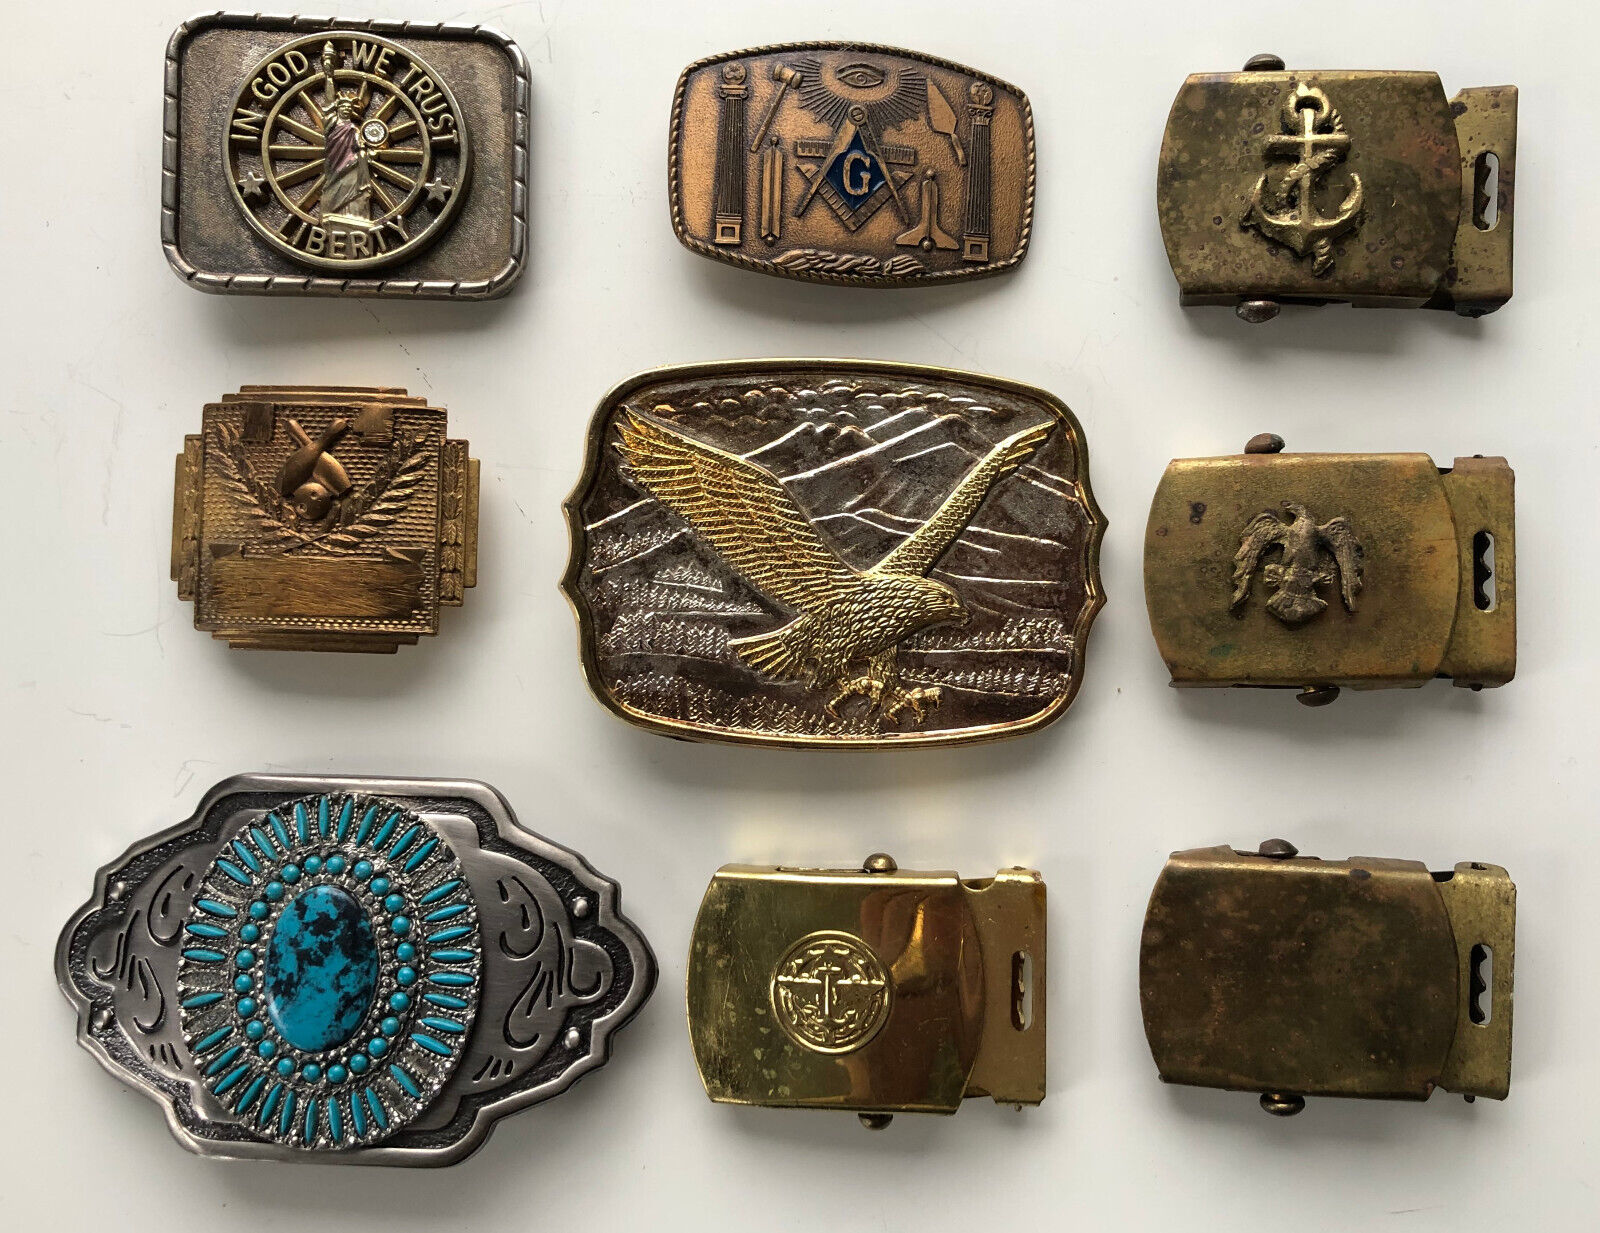 LOT 10 VINTAGE WW2 OR LATER US MILITARY NAVY BRASS JUNK DRAWER BUCKLE PLUS MISC